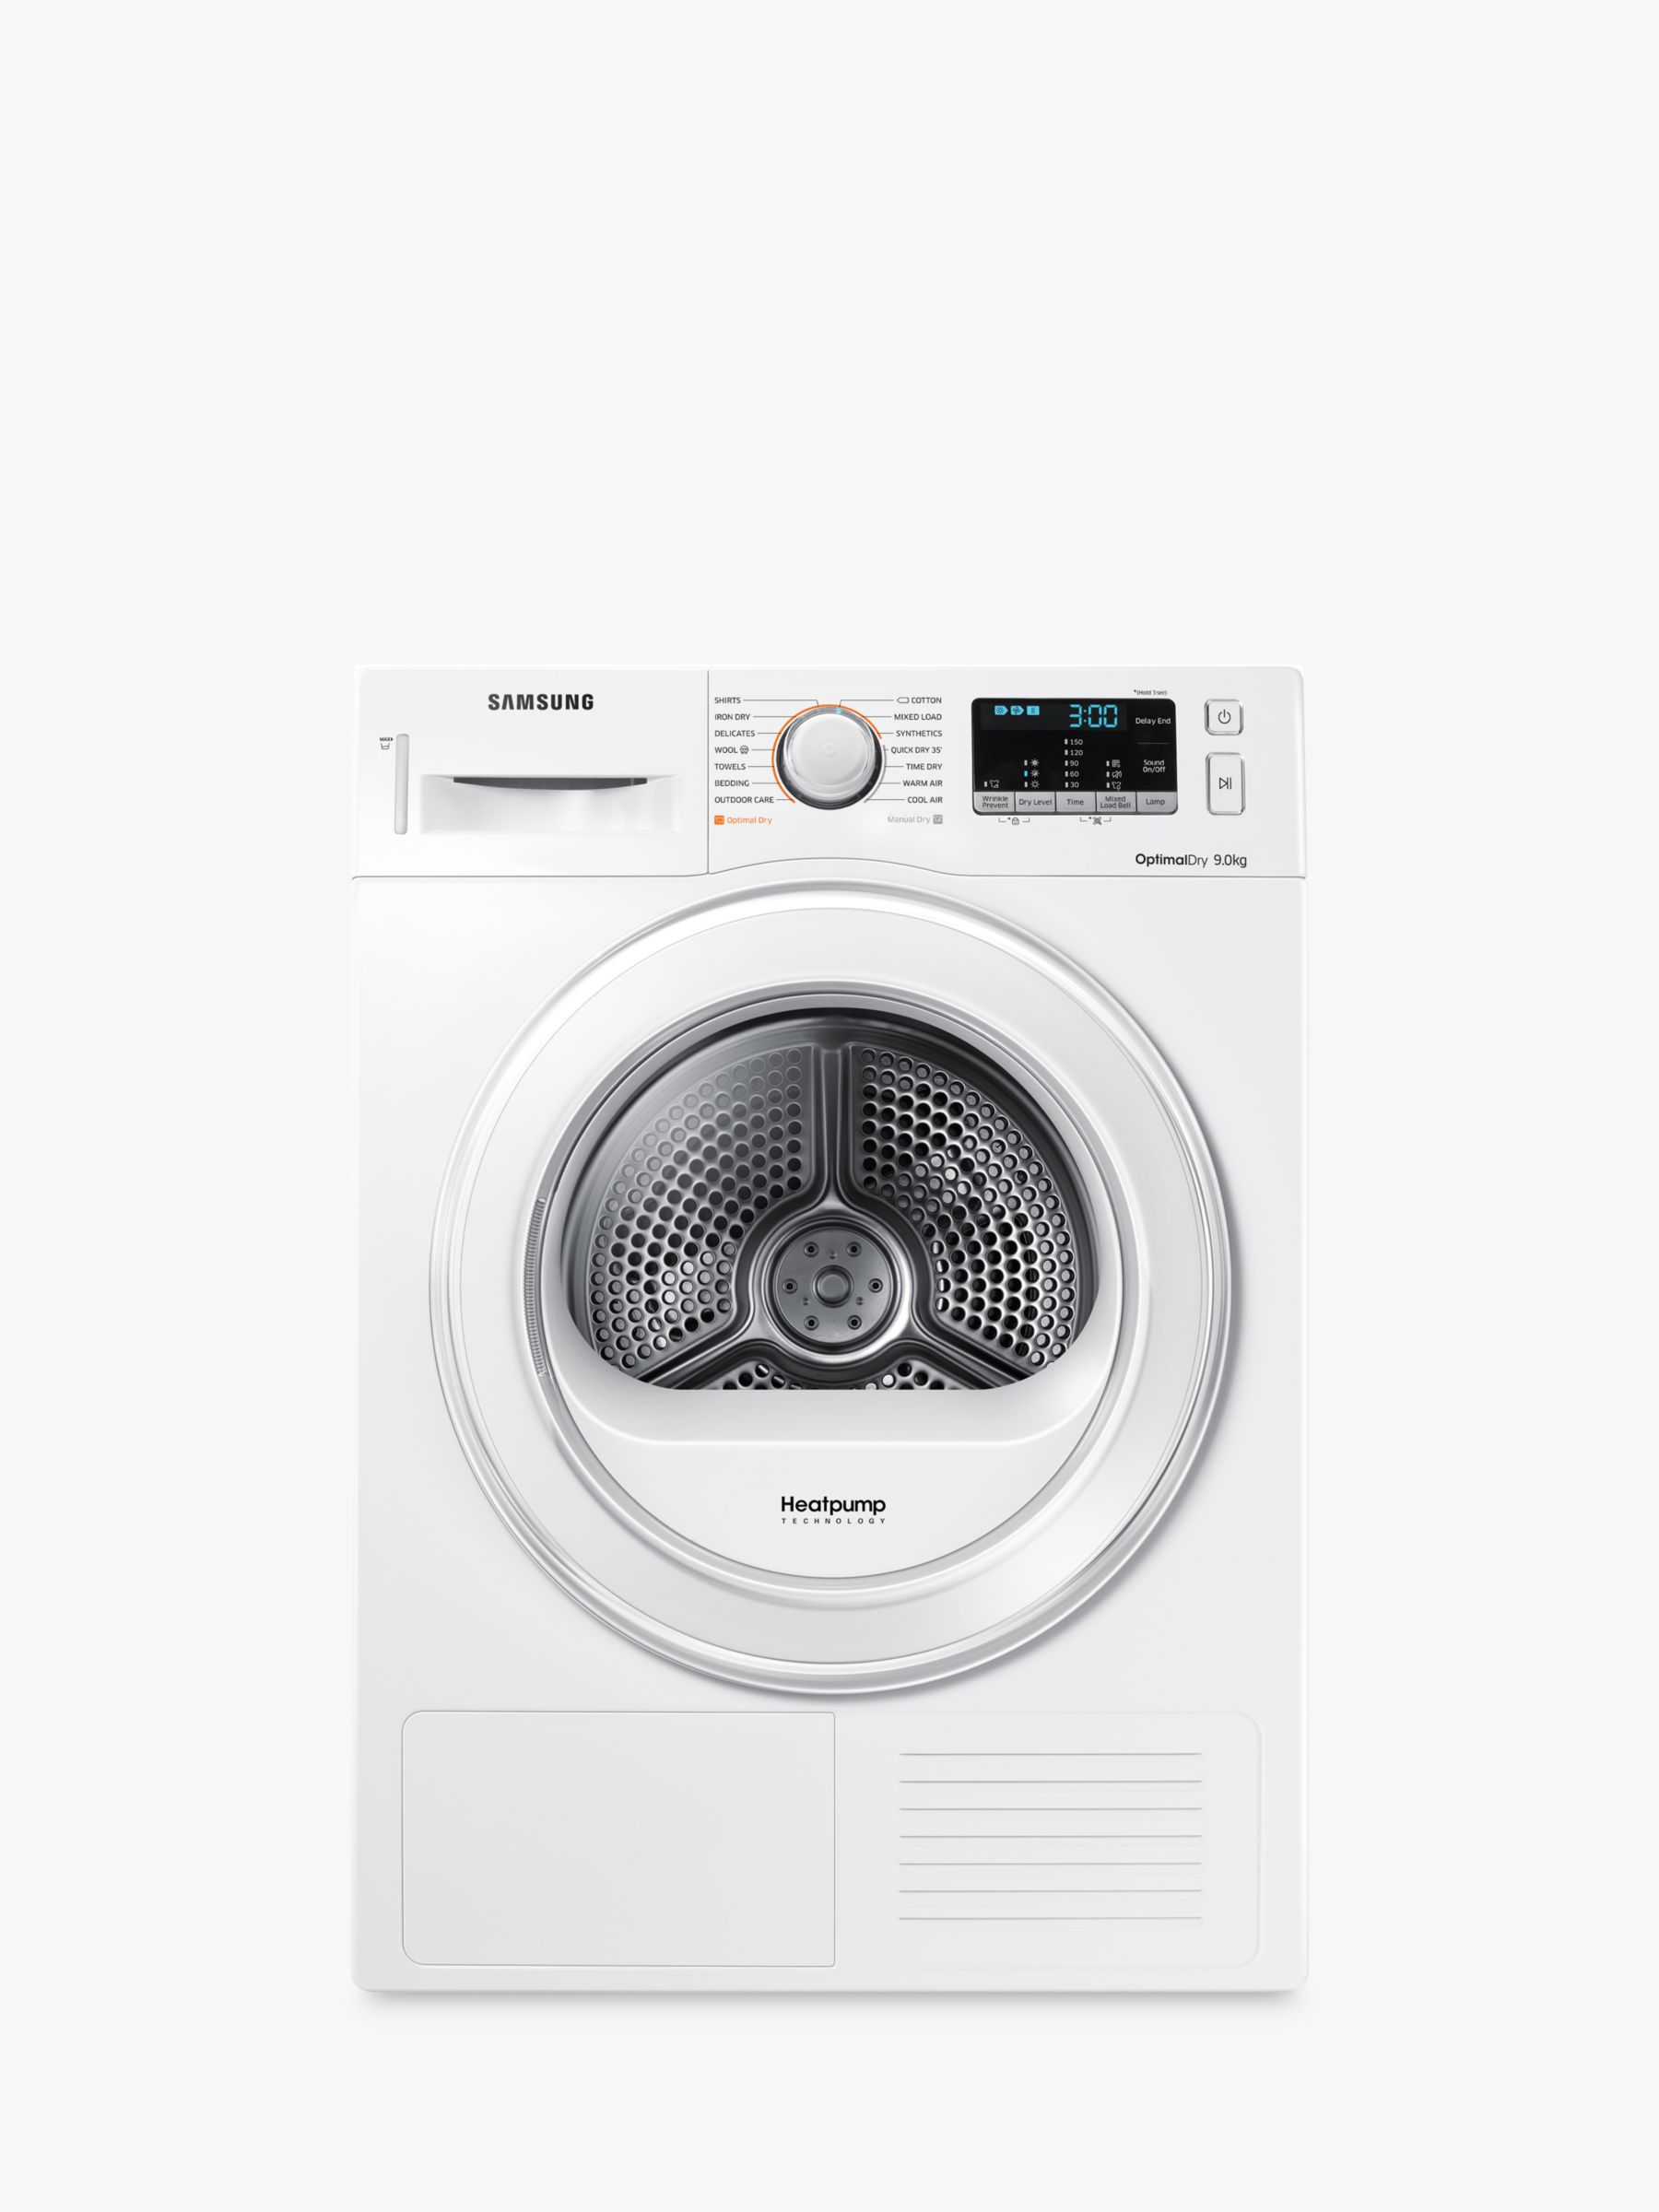 Samsung DV90M5000IW/EU Condenser Tumble Dryer with Heat Pump, 9kg Load, A++ Energy Rating, White